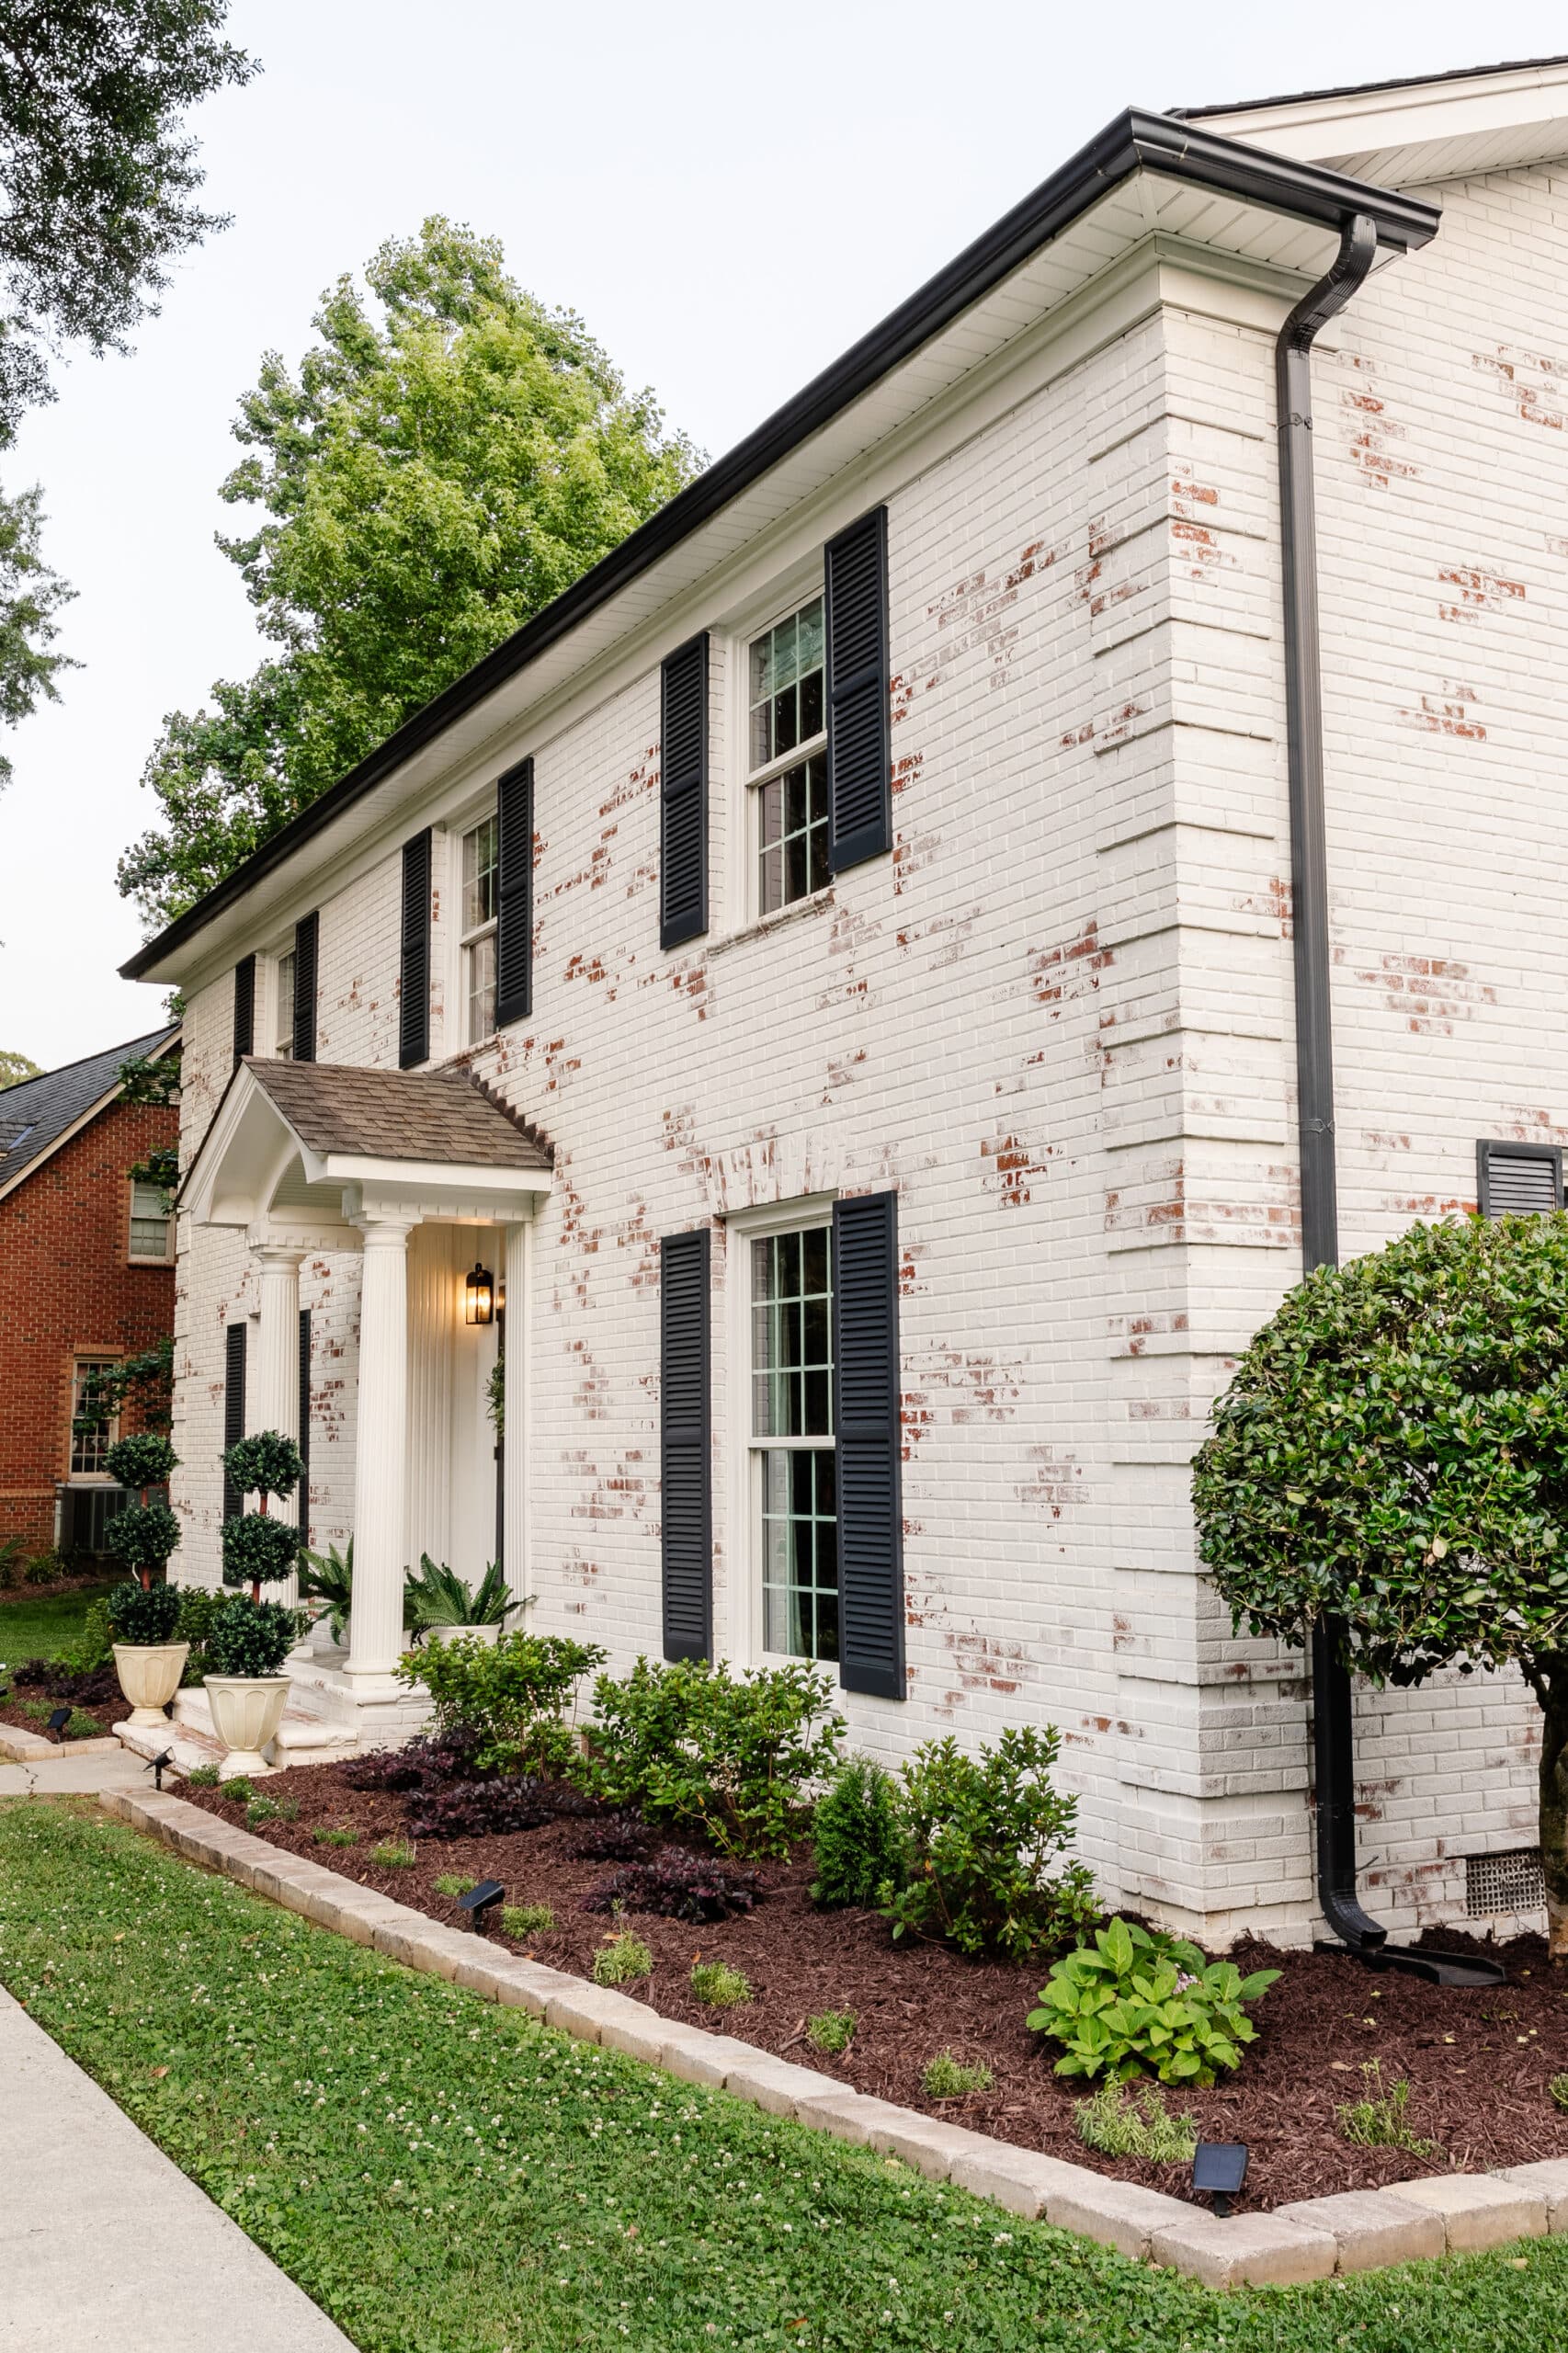 limewashed brick colonial house and flower beds